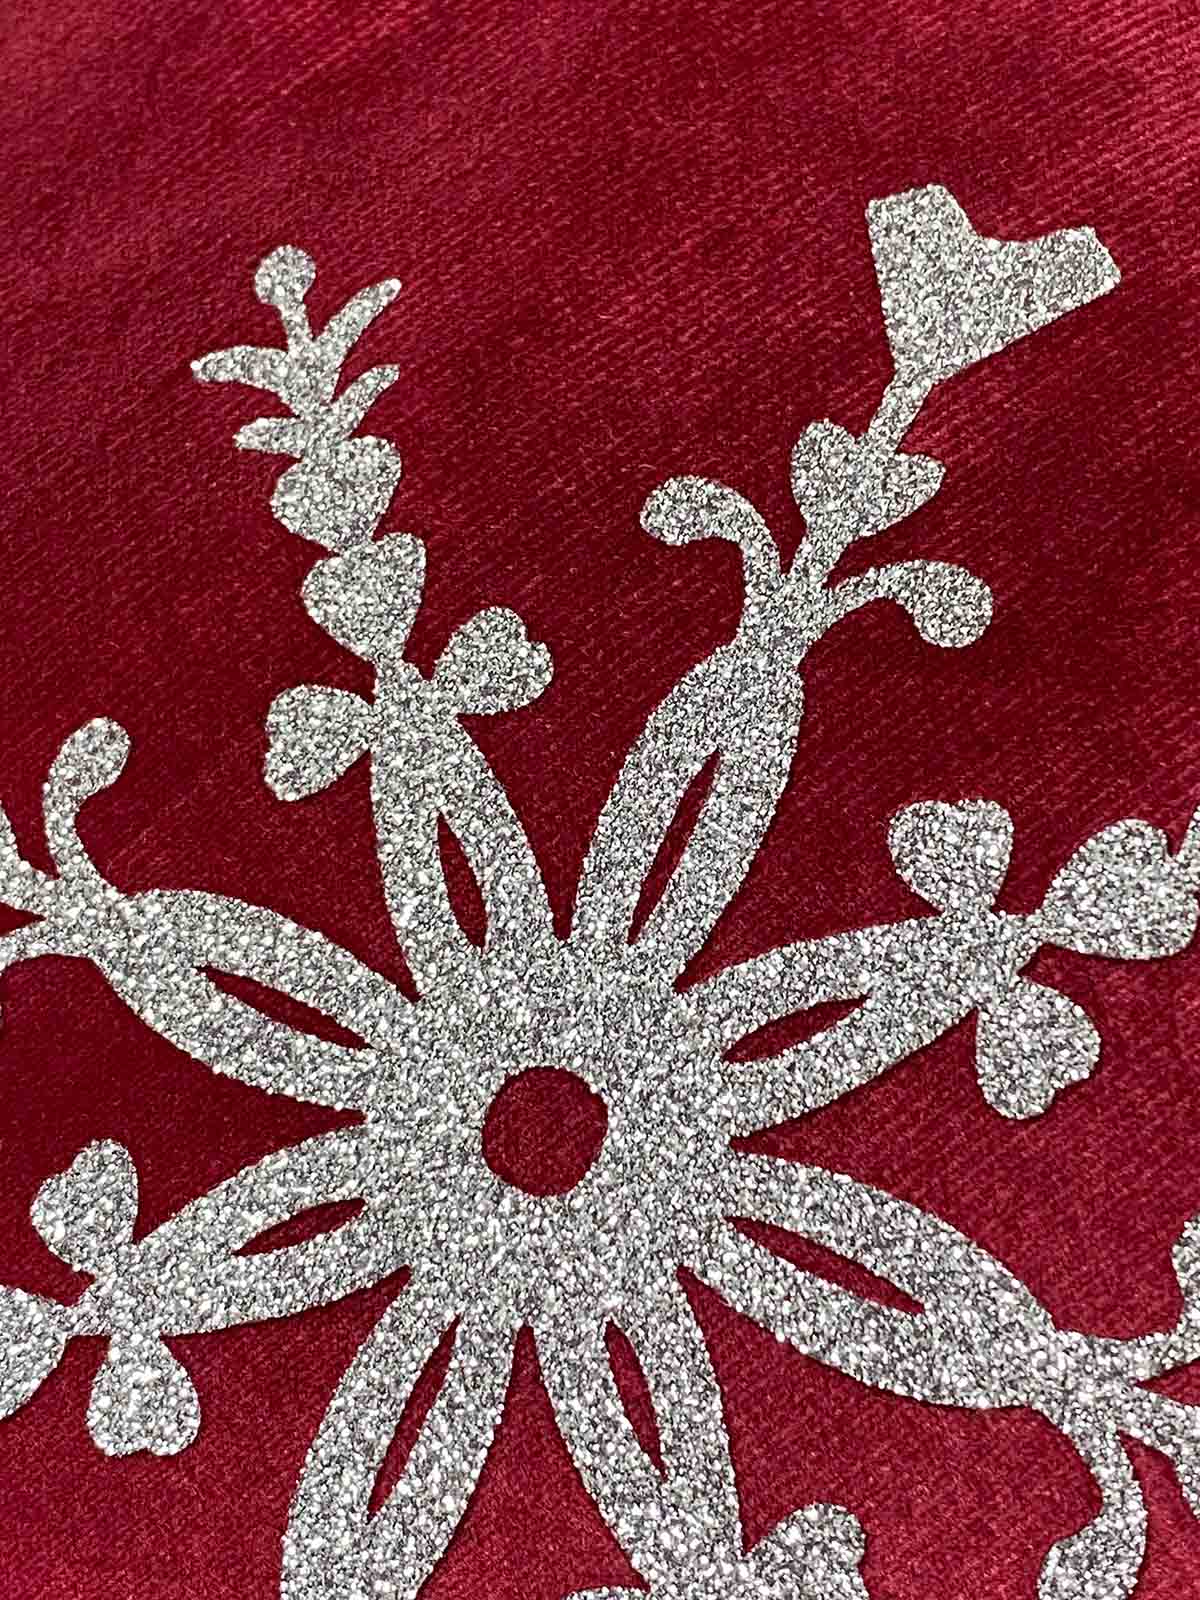 Free Heart Snowflake PNG on red velvet cushions with silver glitter vinyl snowflake. Free heart snowflake cut file used.